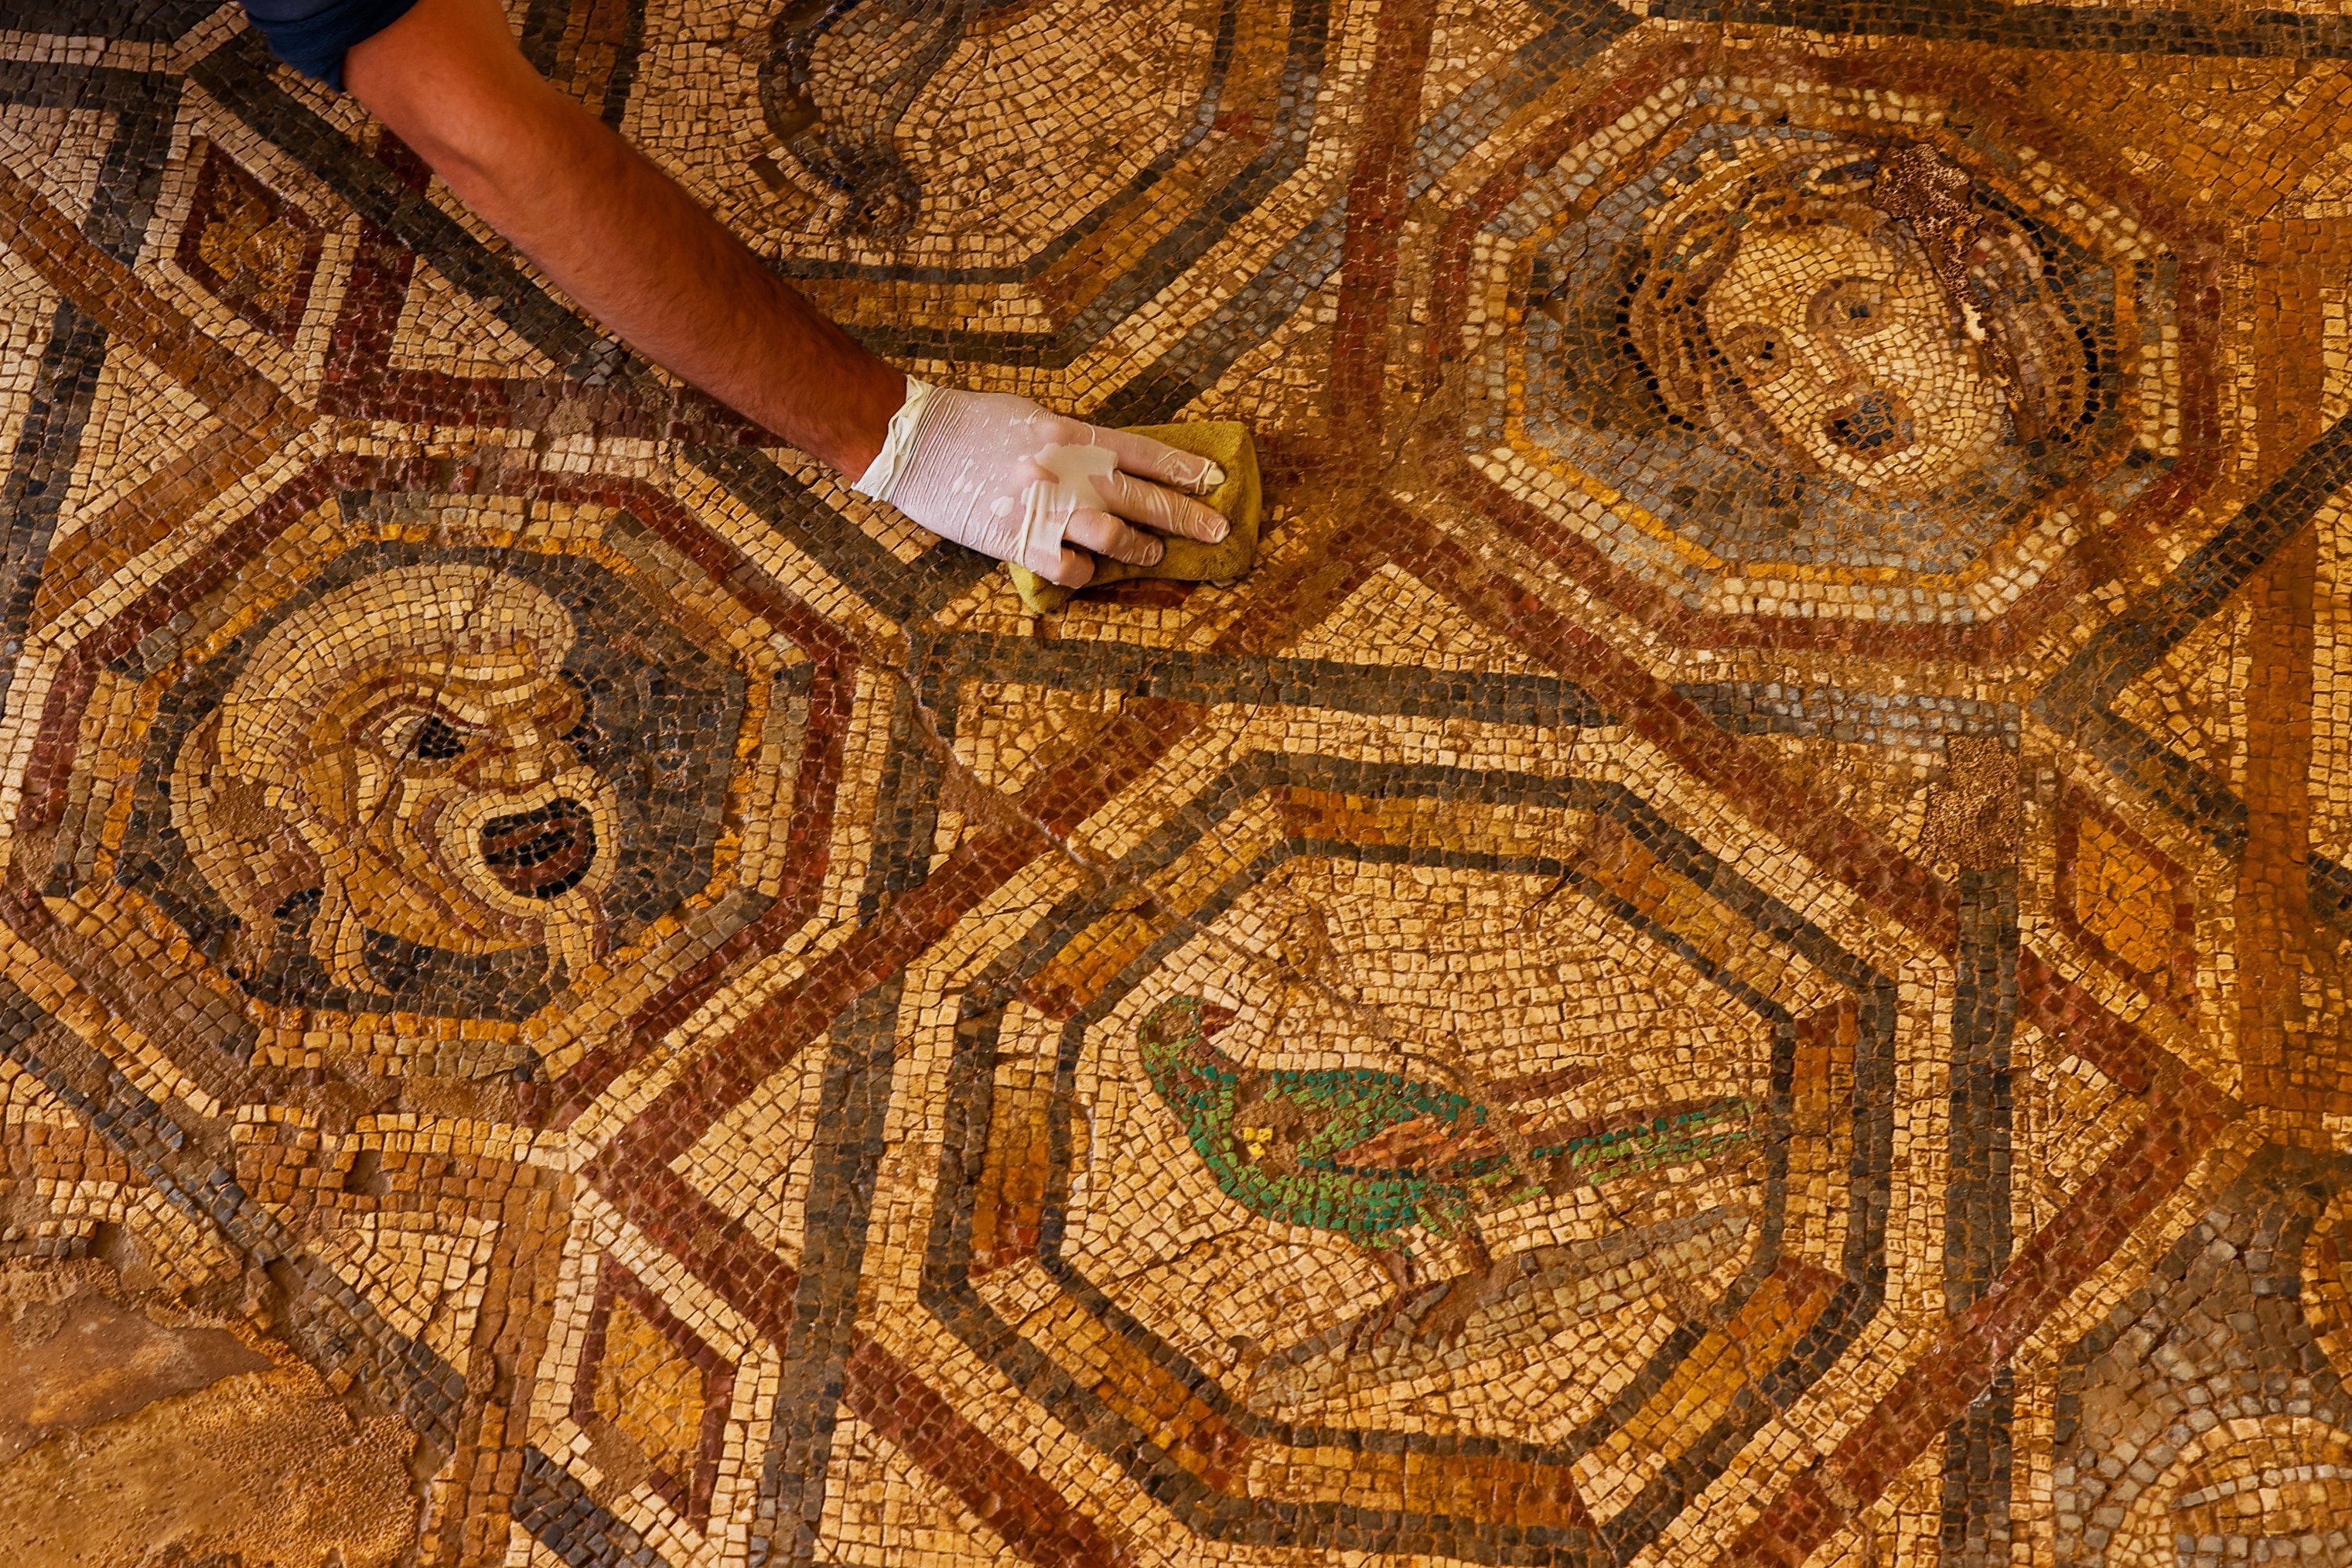 Archaeologists Unearthed Three Ancient Greek Mosaics 2nd Century BC - Mnews